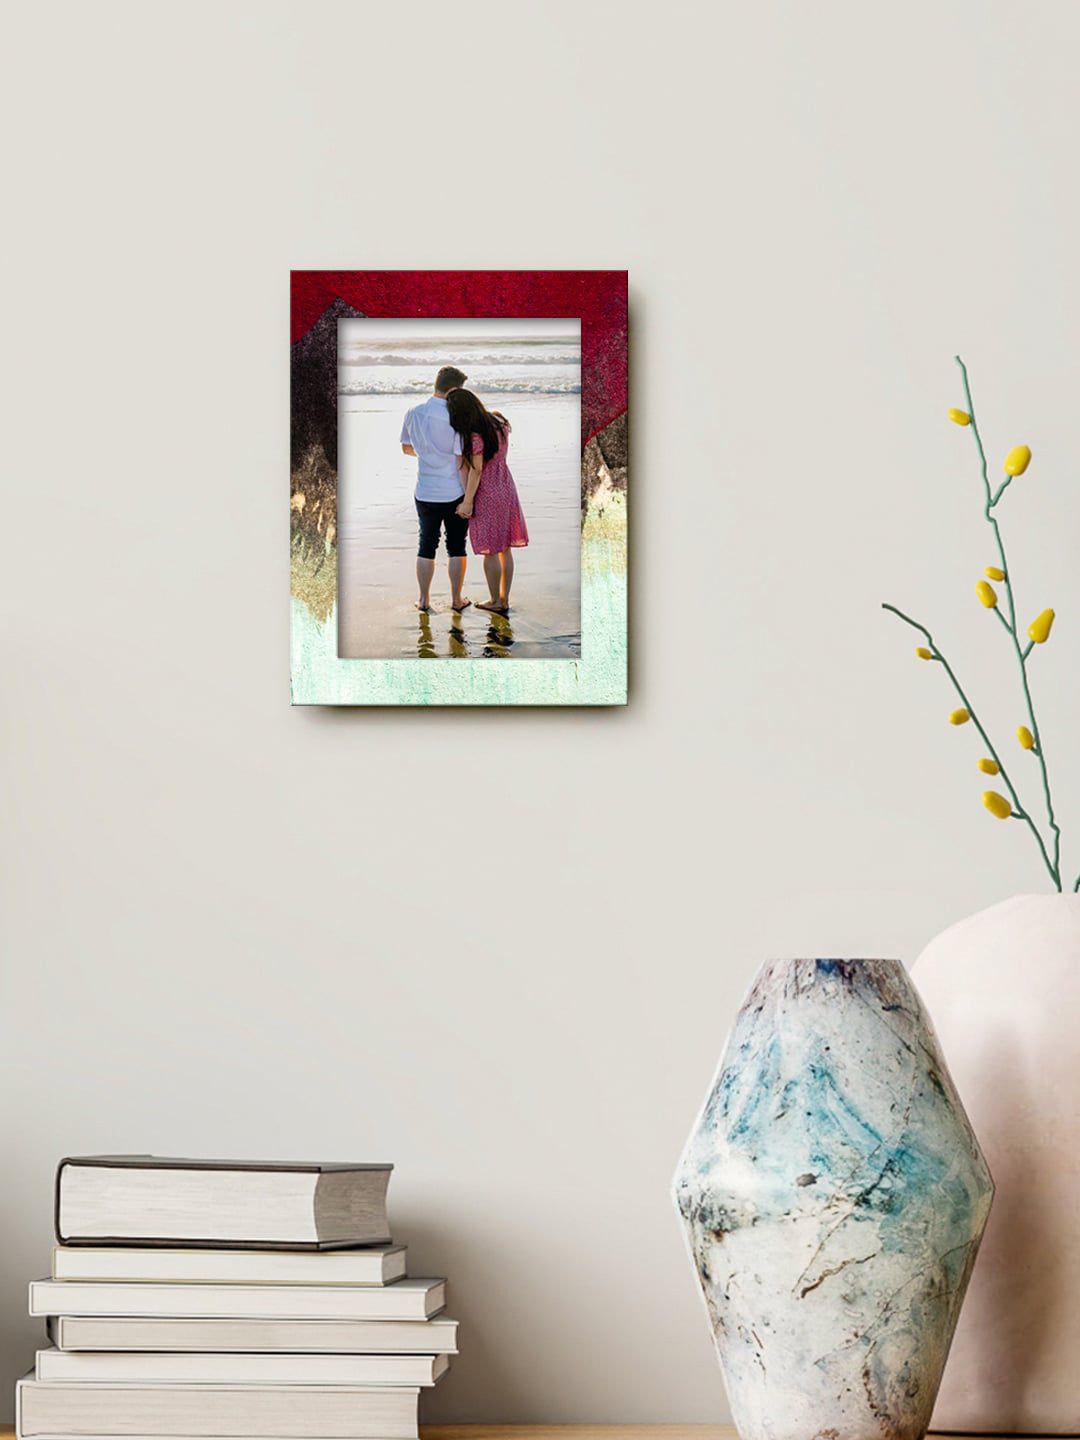 999Store Green & Red Printed MDF Wall Photo Frame Price in India